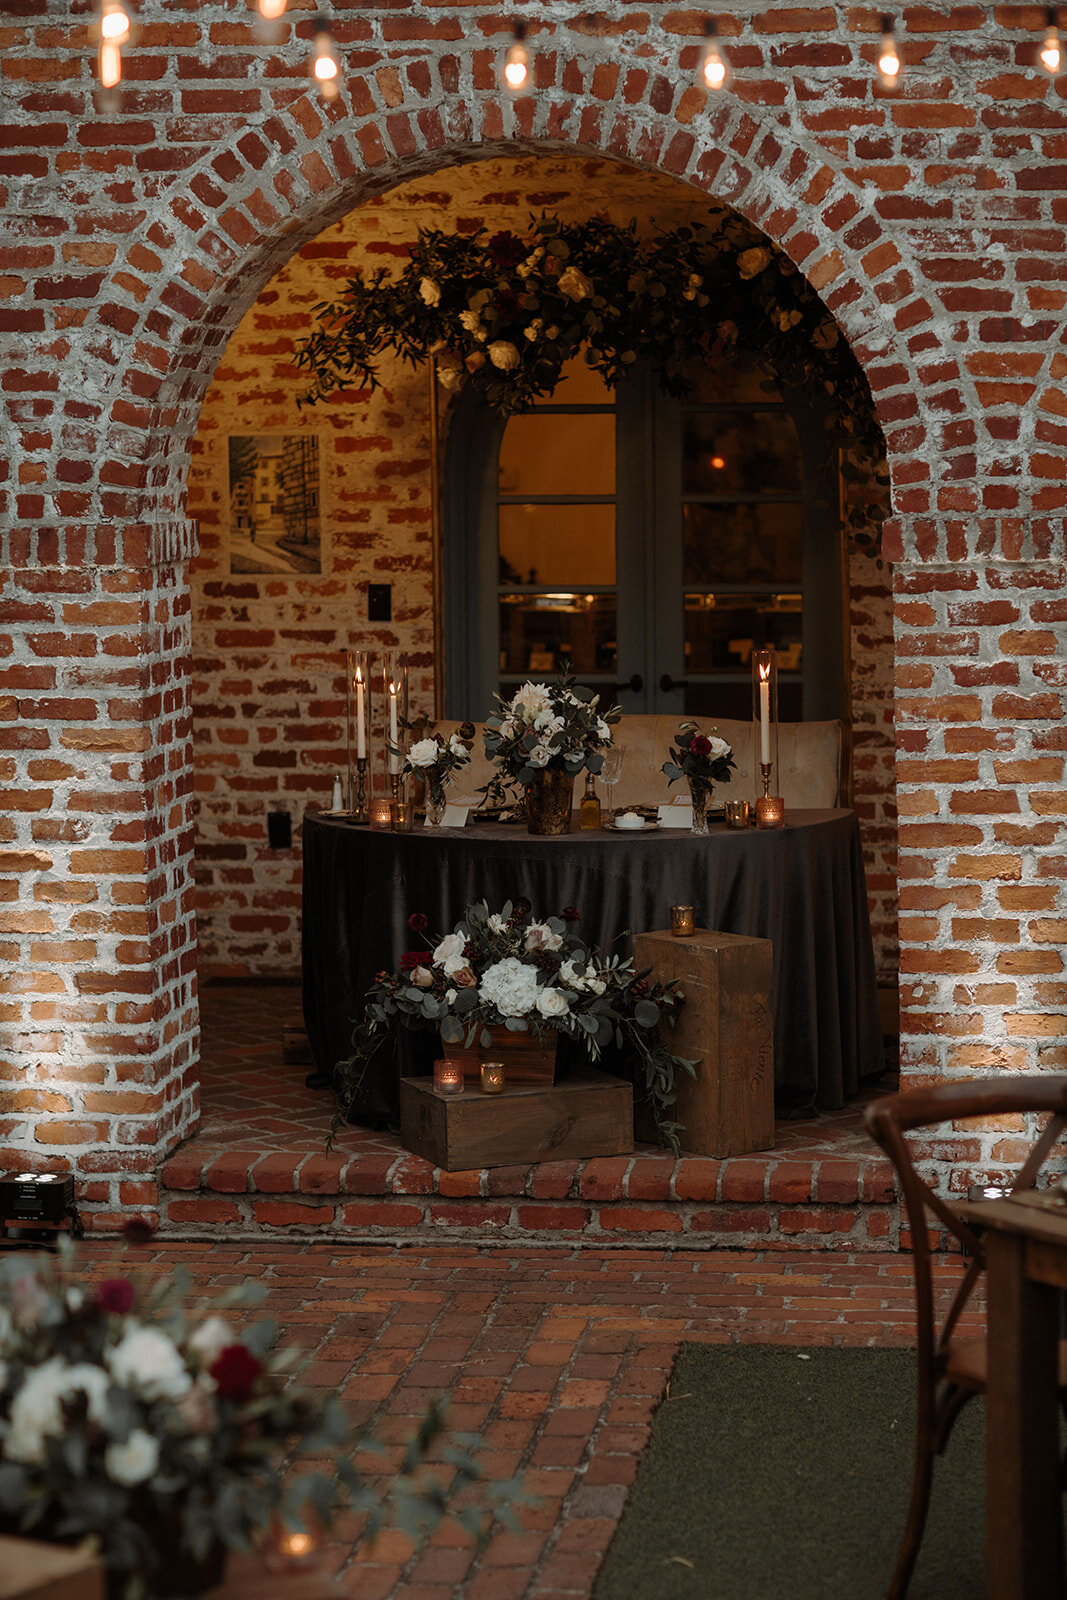 Bluegrass Chic, The Ferros, Casa Feliz farm tables with lush floral, runners and brass candlesticks